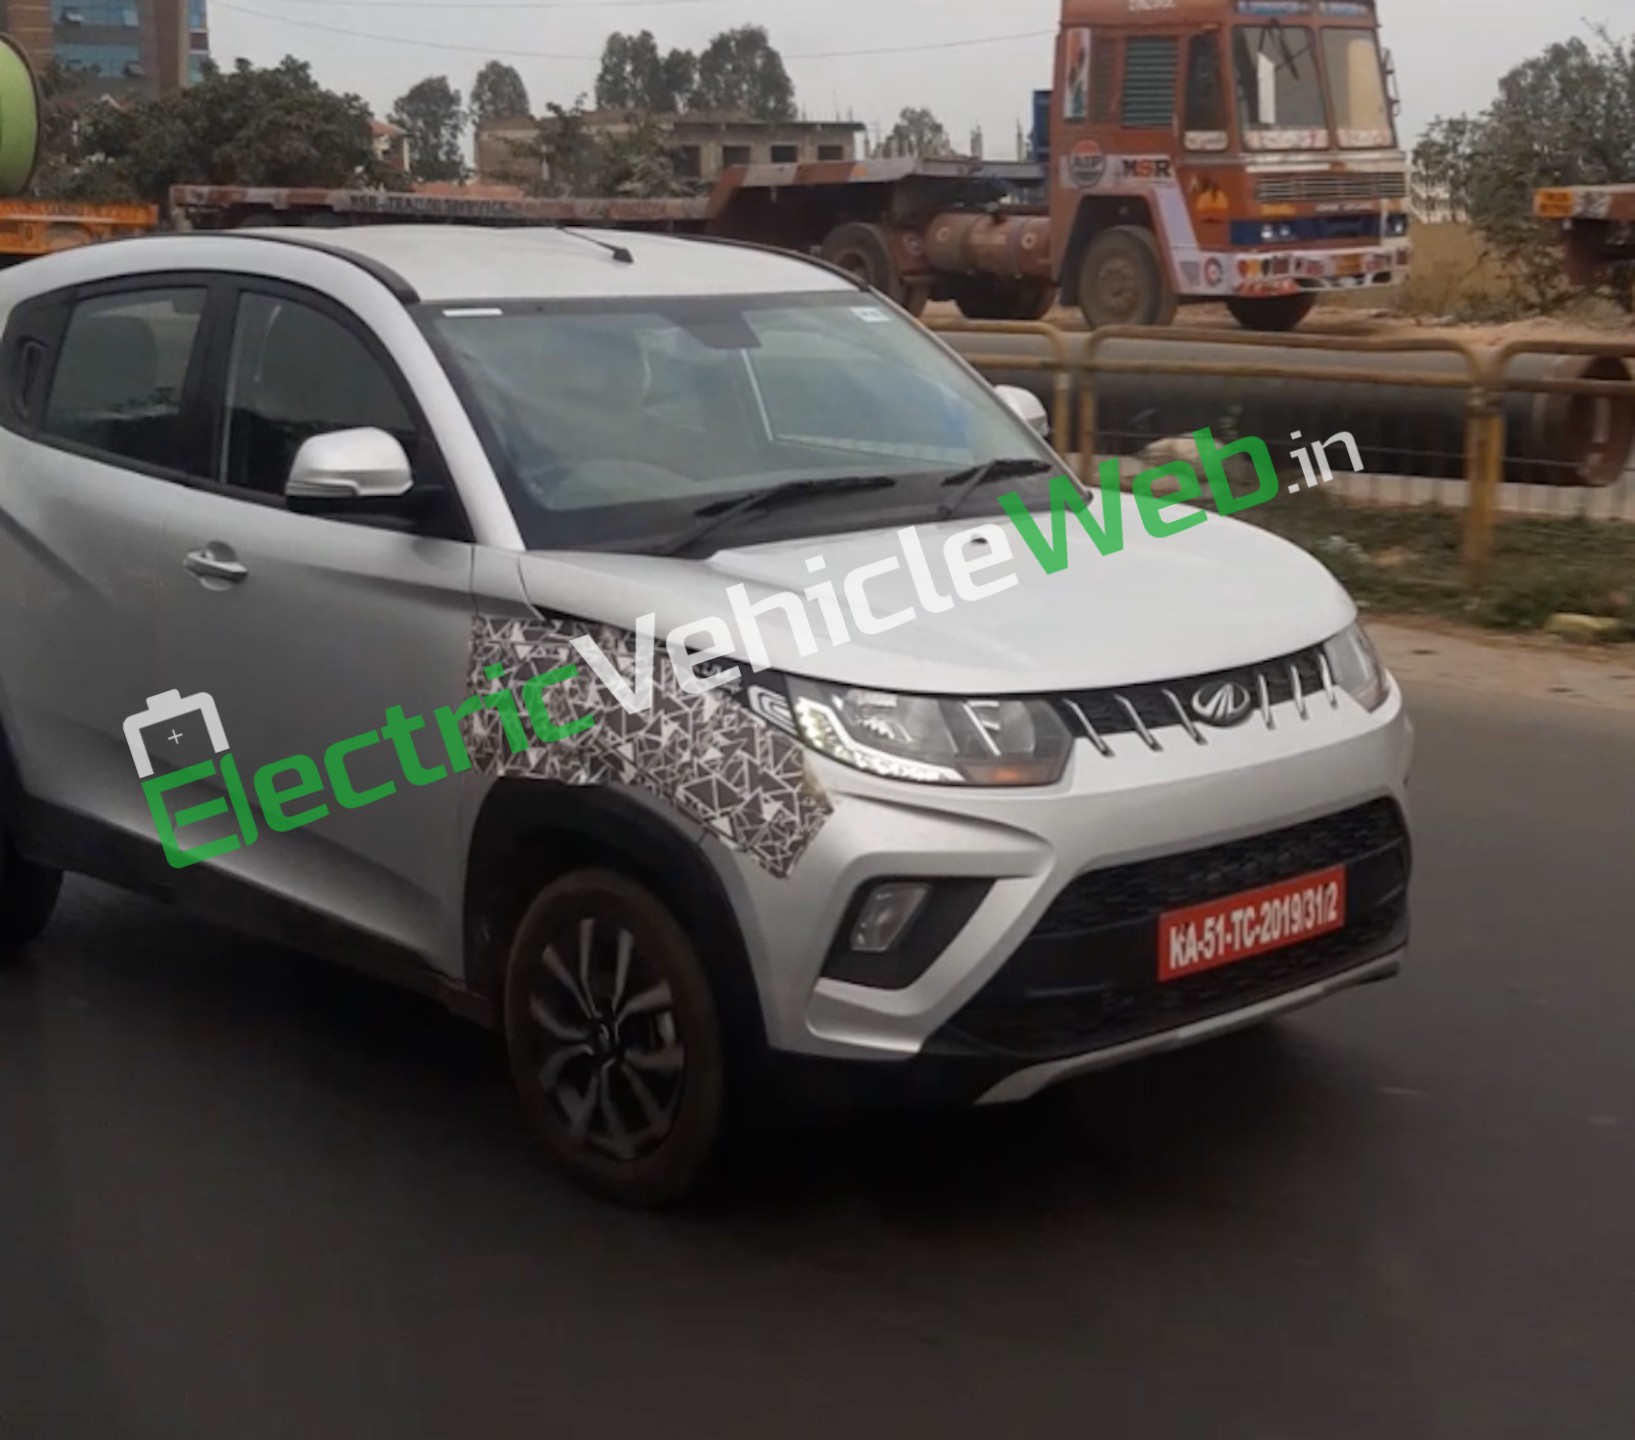 Mahindra KUV100 electric 9 lakh price spotted testing